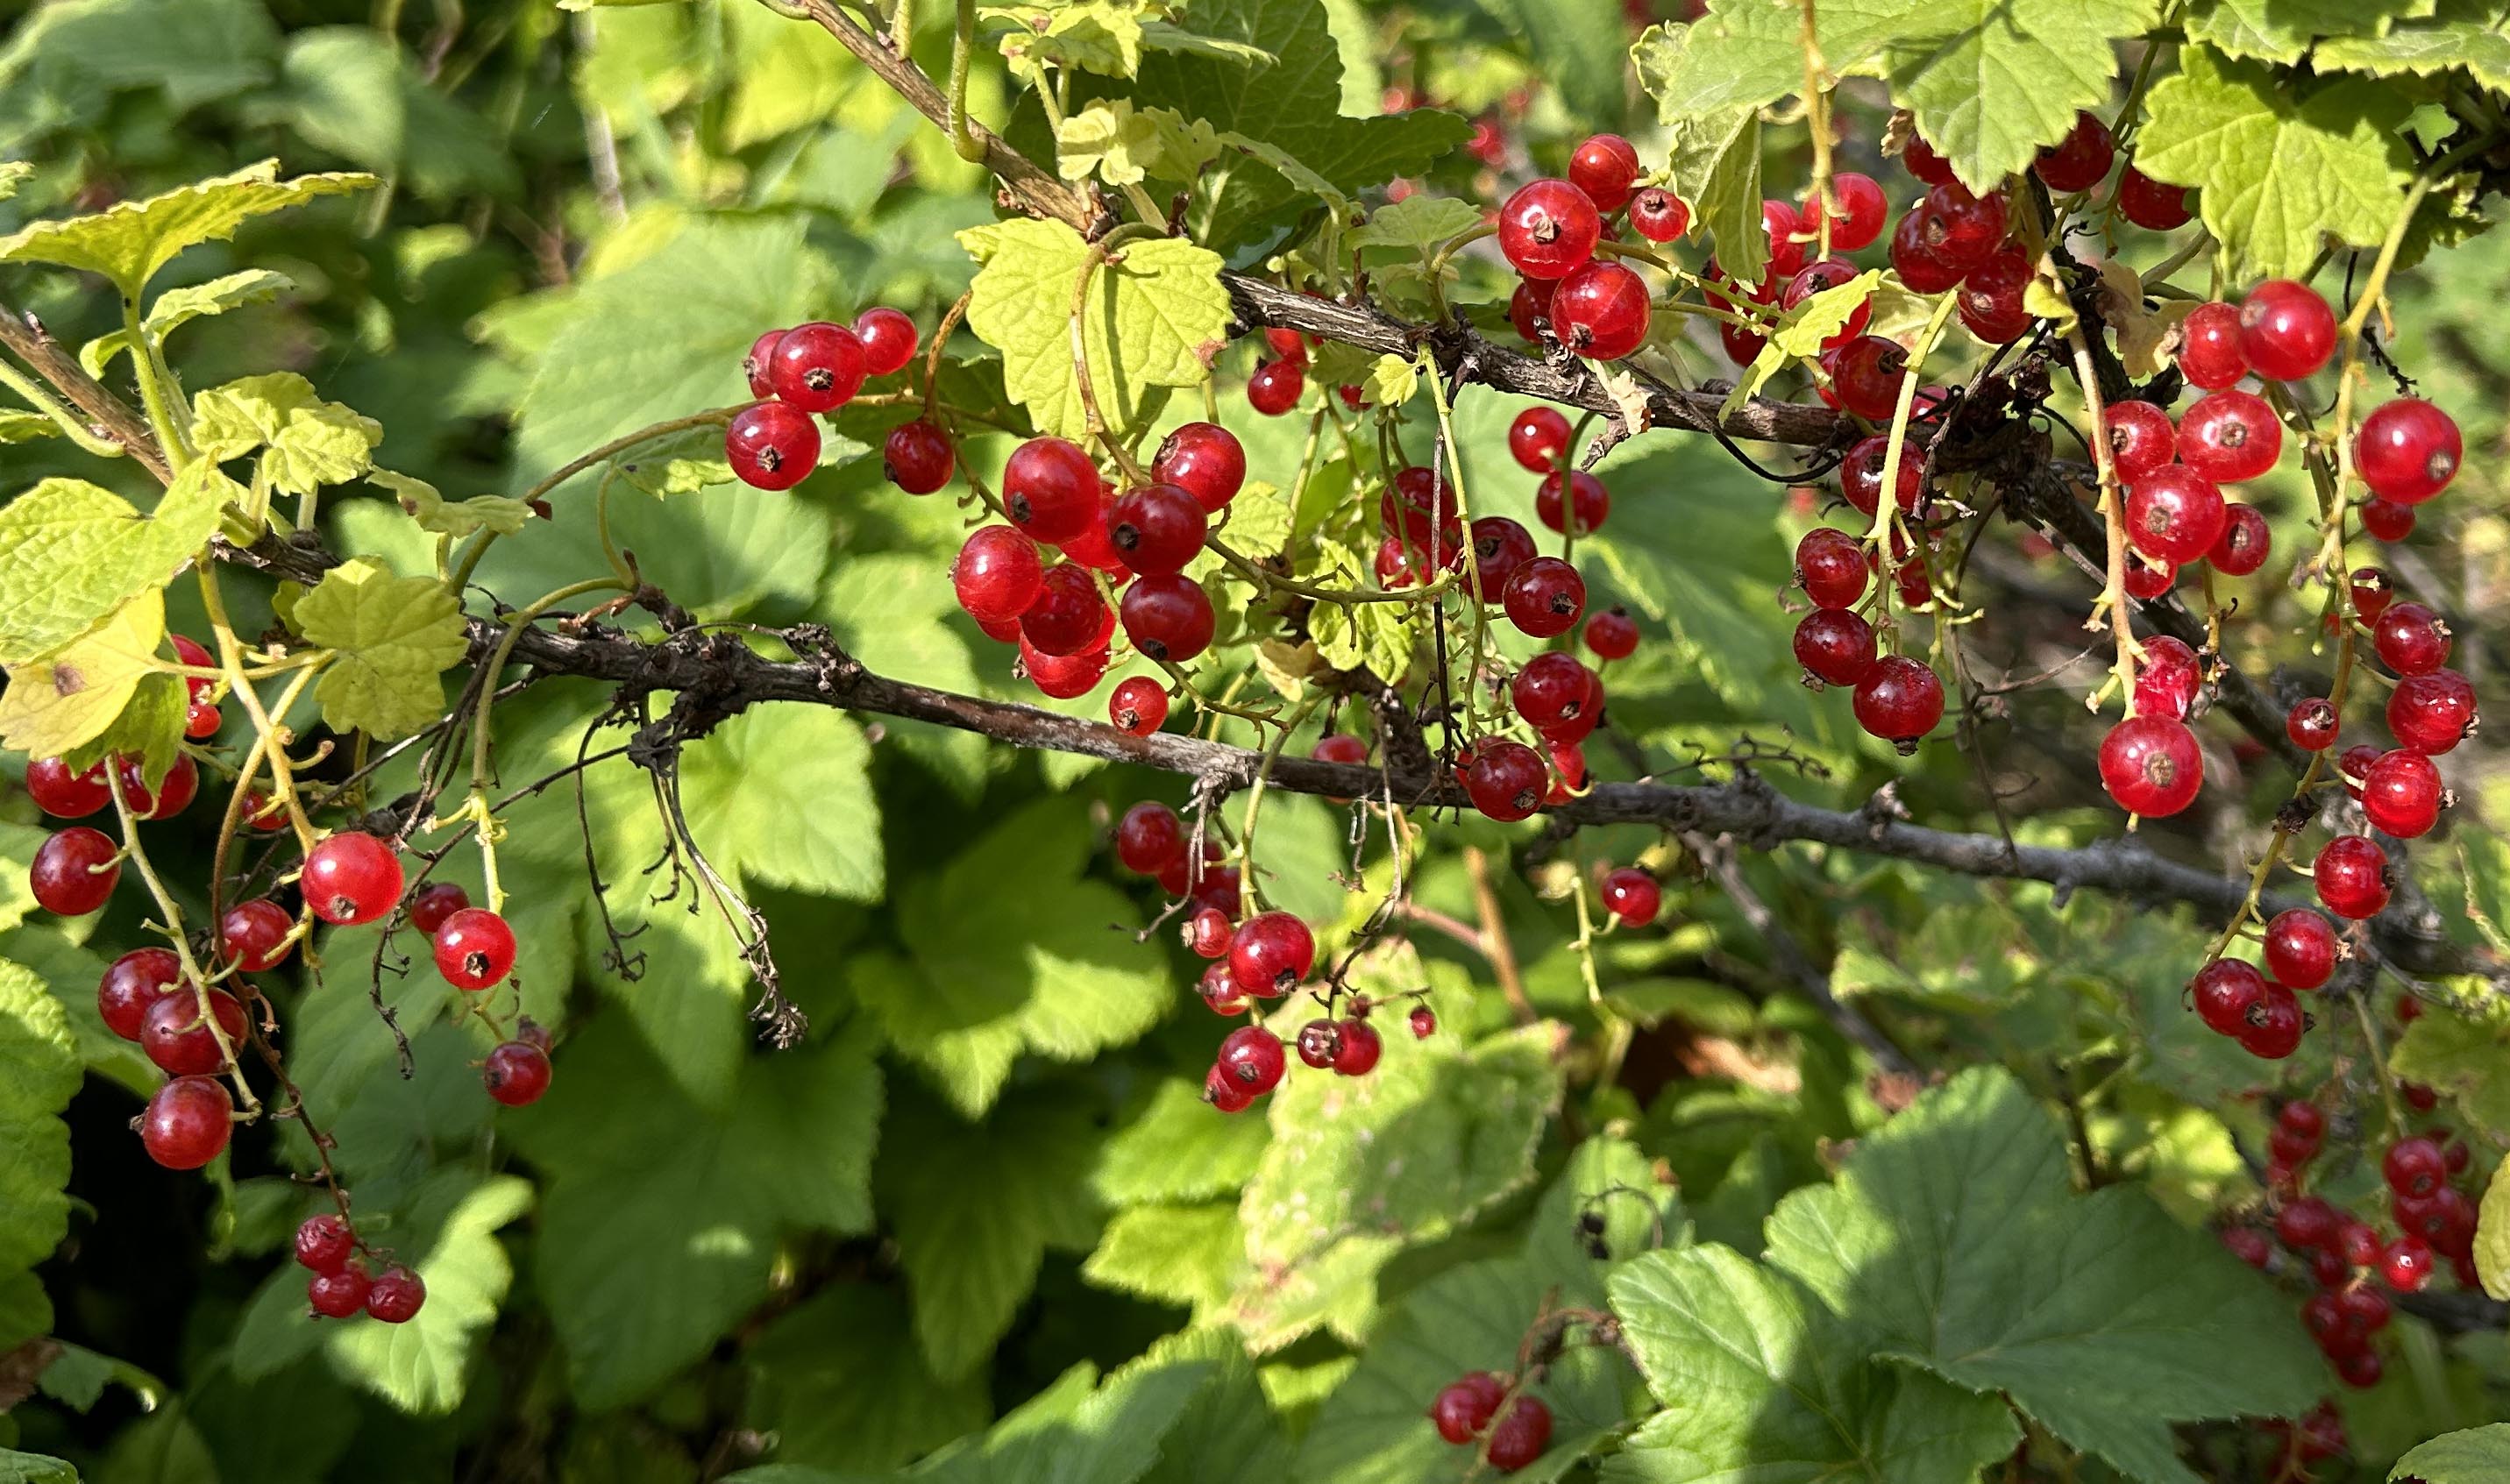 Translucent red berries on plant with lobed green leaves